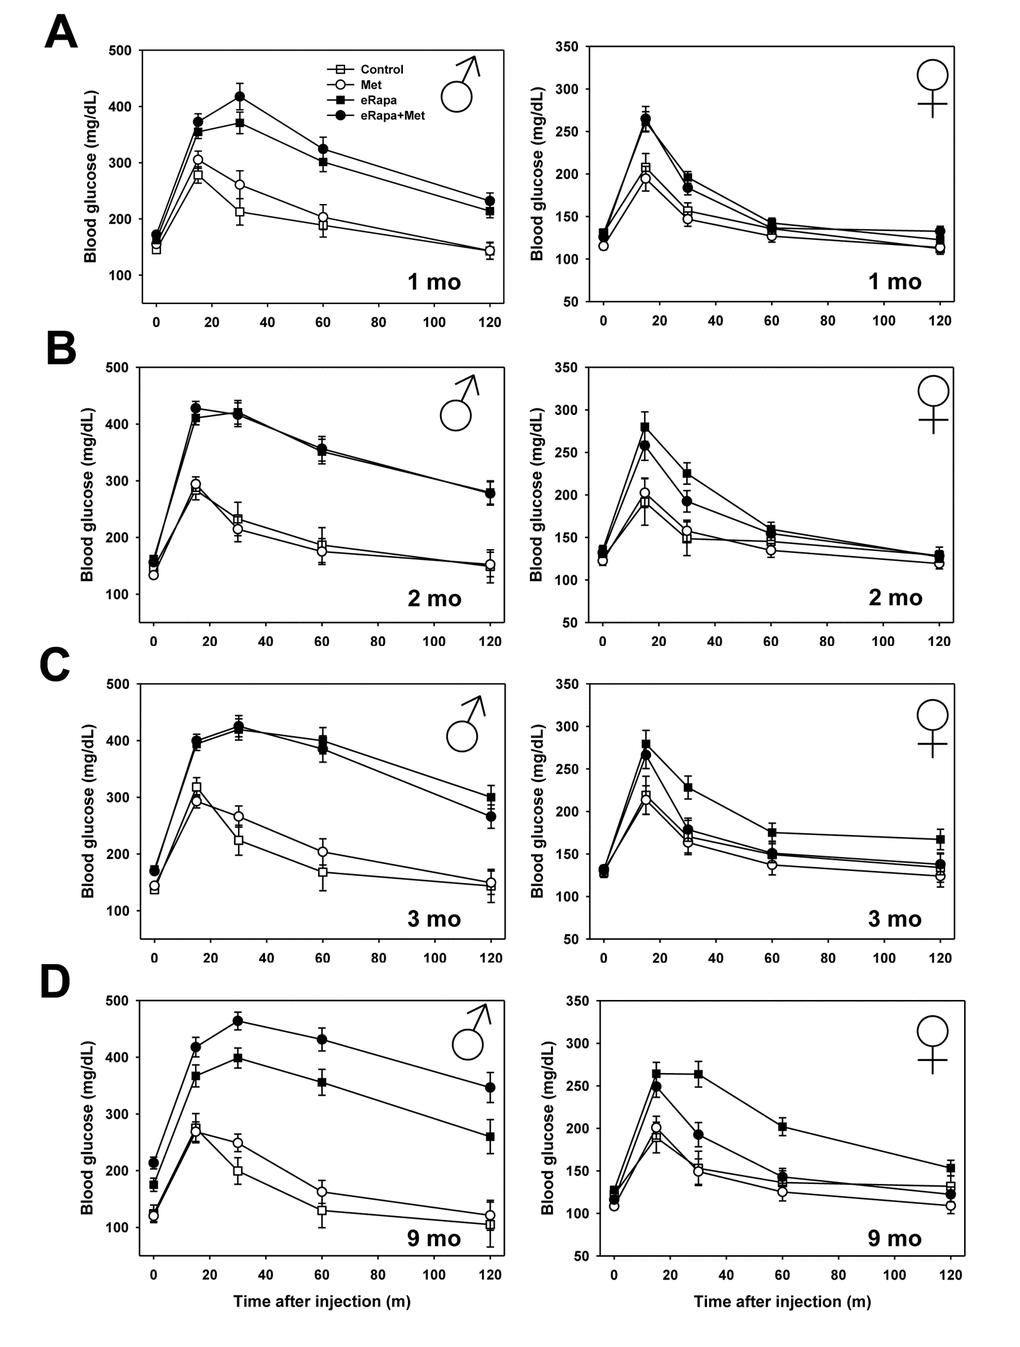 Metformin abrogates rapamycin-mediated glucose intolerance in female mice. Glucose tolerance tests performed in male (left) and female (right) mice following (A) 1, (B) 2, (C) 3, or (D) 9 months of indicated diet treatments. Symbols represent mean values for indicated group at each time point ± SEM. For all groups, n=8-10.